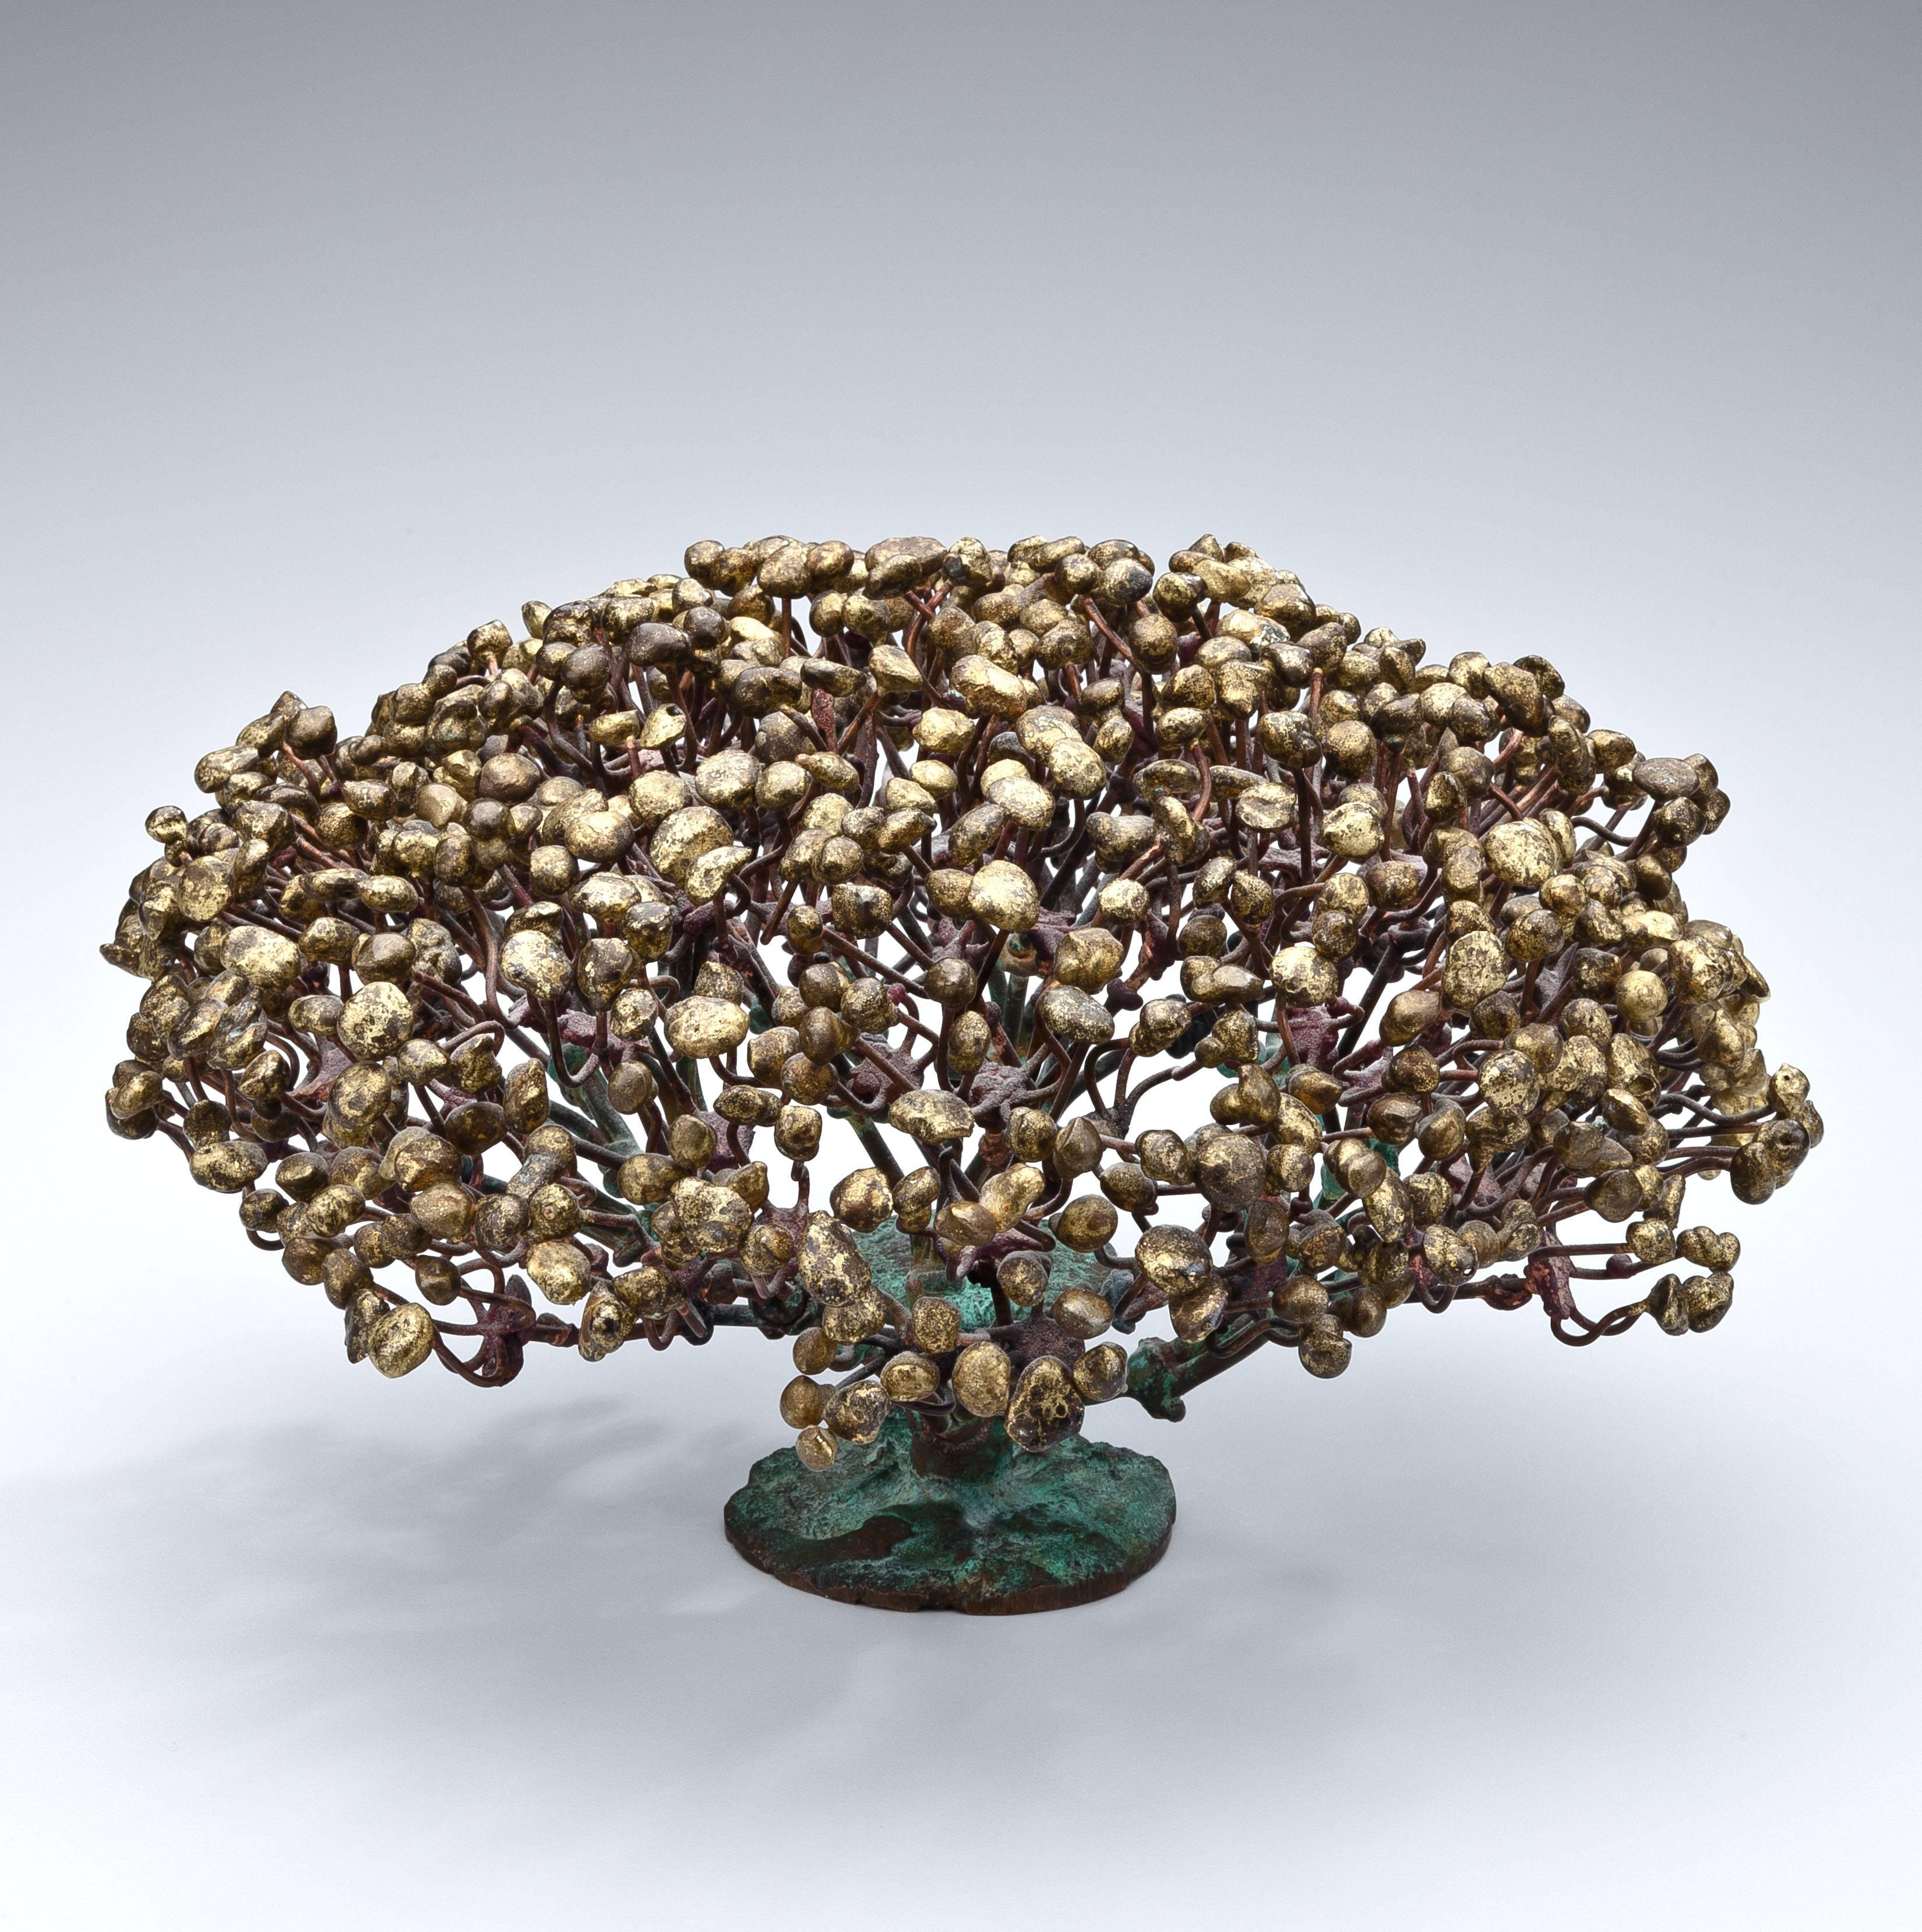 A gilt bronze bush sculpture by Harry Bertoia (1915-1978) highlighted by gold and red patina creating colorful contrasts. The gilt wire branches radiate out from the pipe stem base culminating in gilt bronze buds each individually soldered to its